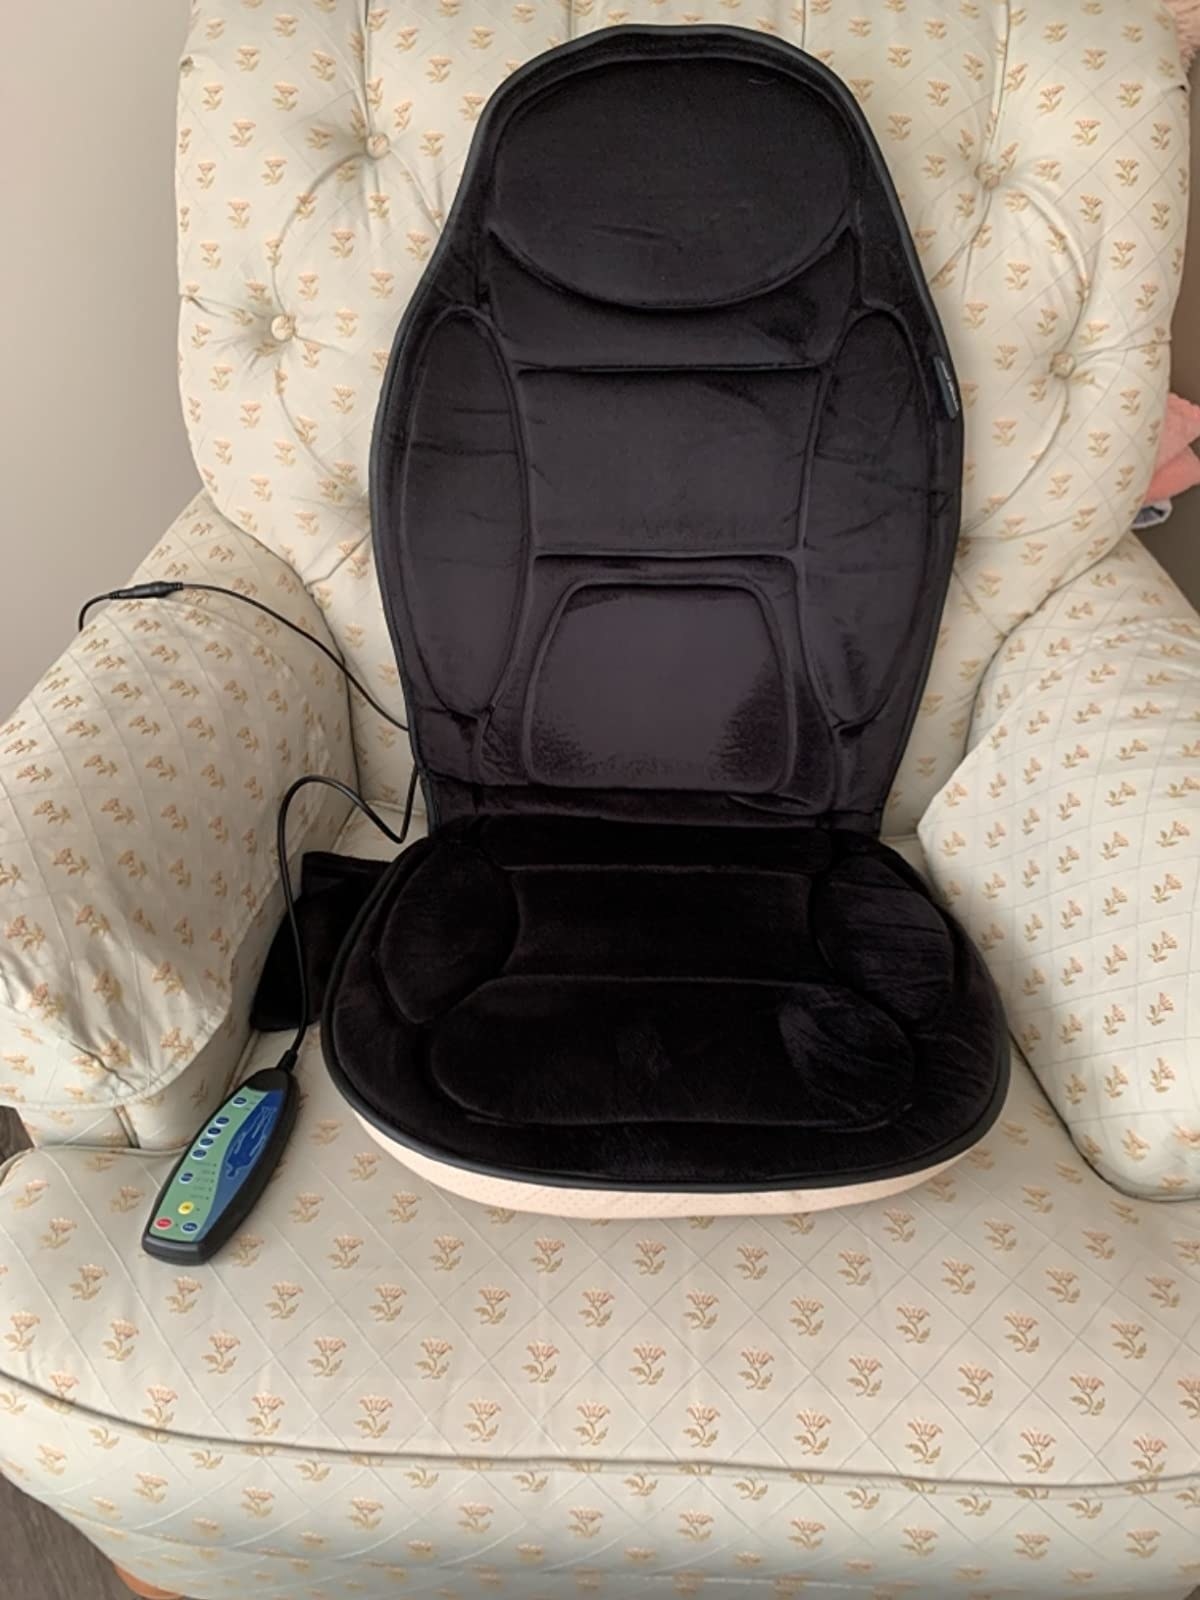 The massage seat cushion on a chair with its remote control